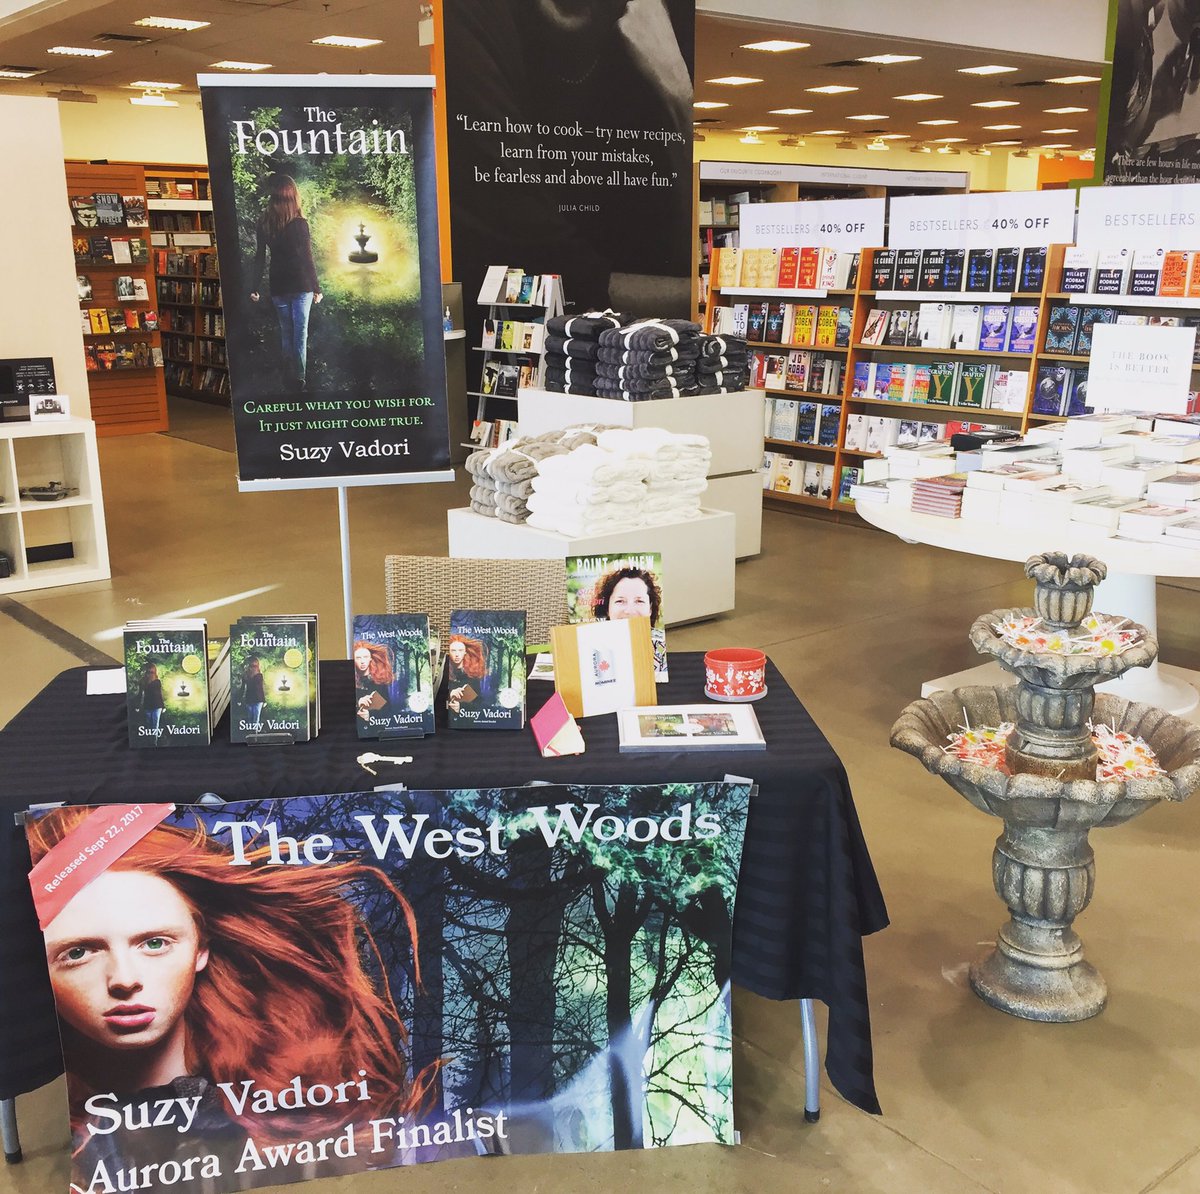 Signing #TheWestWoods @ #indigo Signal Hill #yyc today. If you haven't picked up a copy yet, I'll see you there! #booksigning #amwriting